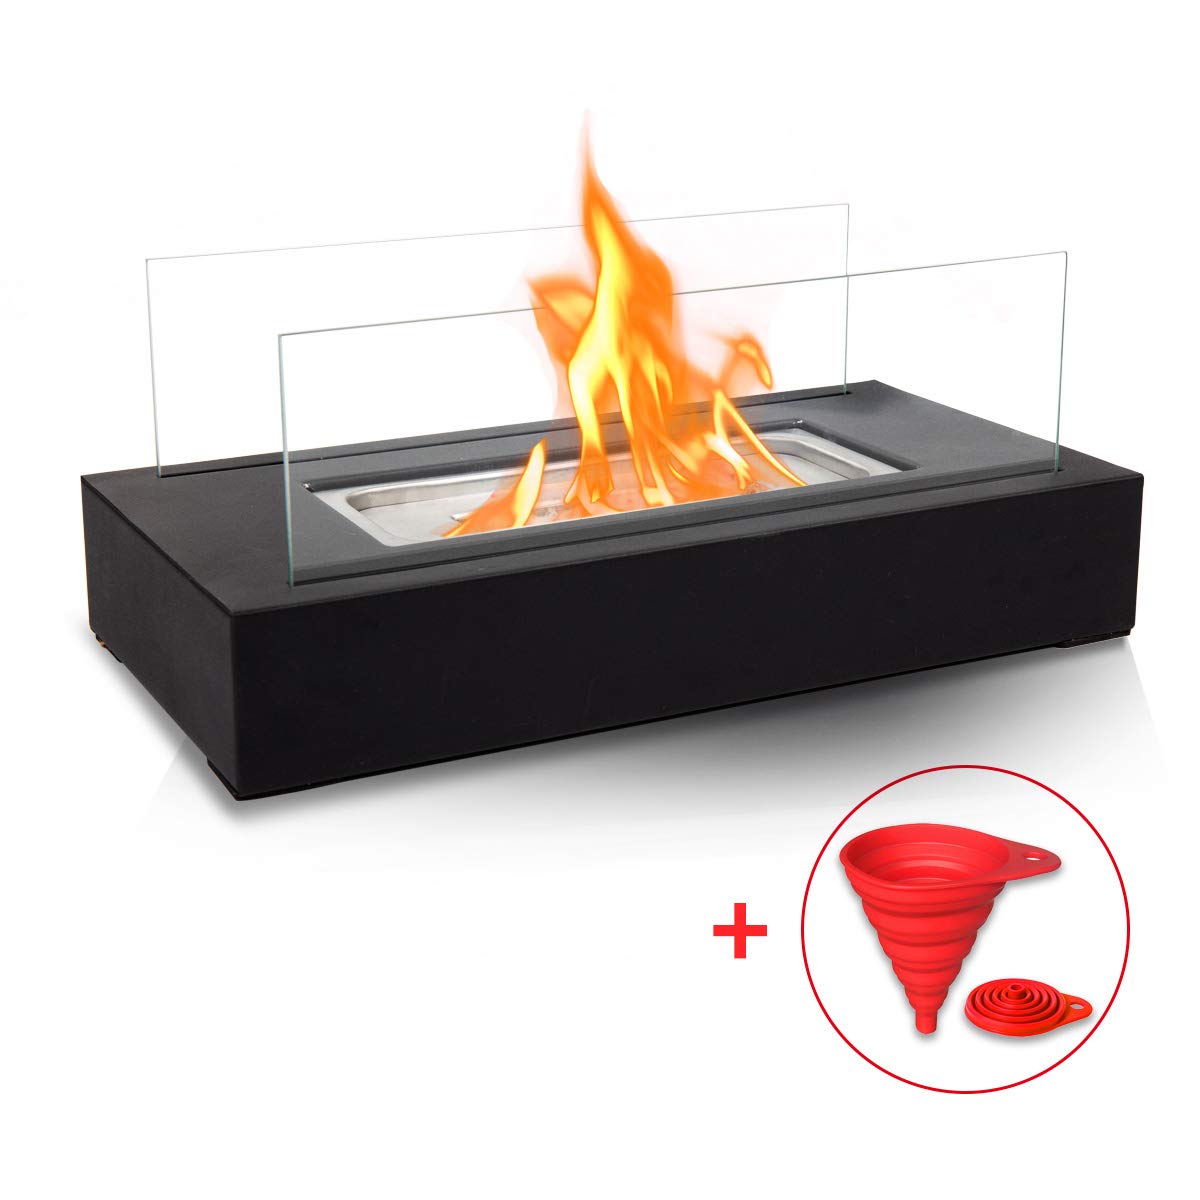 Portable Fireplace Big Lots Awesome Brian & Dany Ventless Tabletop Portable Fire Bowl Pot Bio Ethanol Fireplace Indoor Outdoor Fire Pit In Black W Fire Killer and Funnel